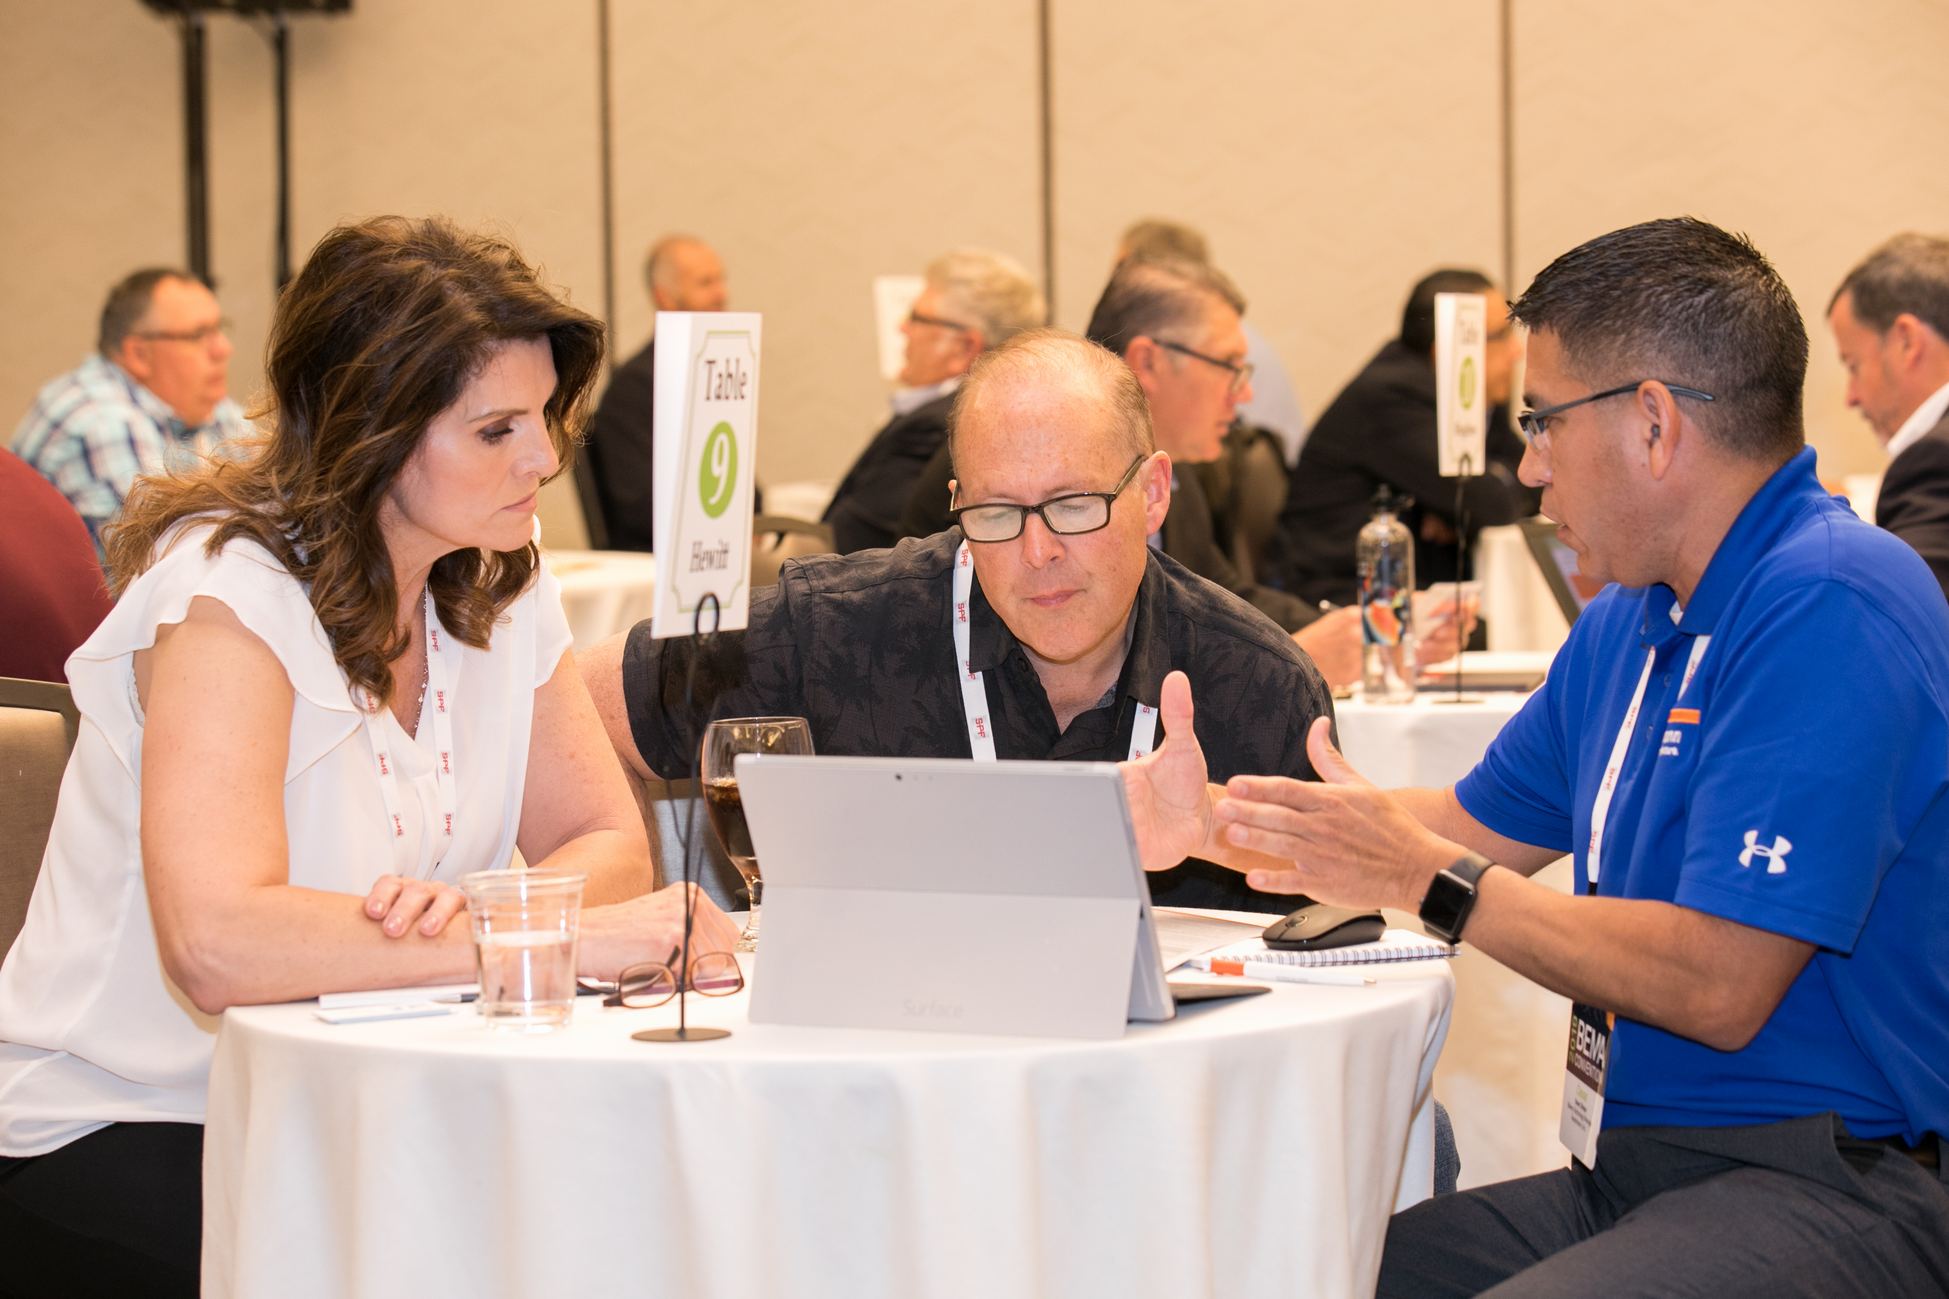 BEMA Members have access to connection opportunities at event throughout the year